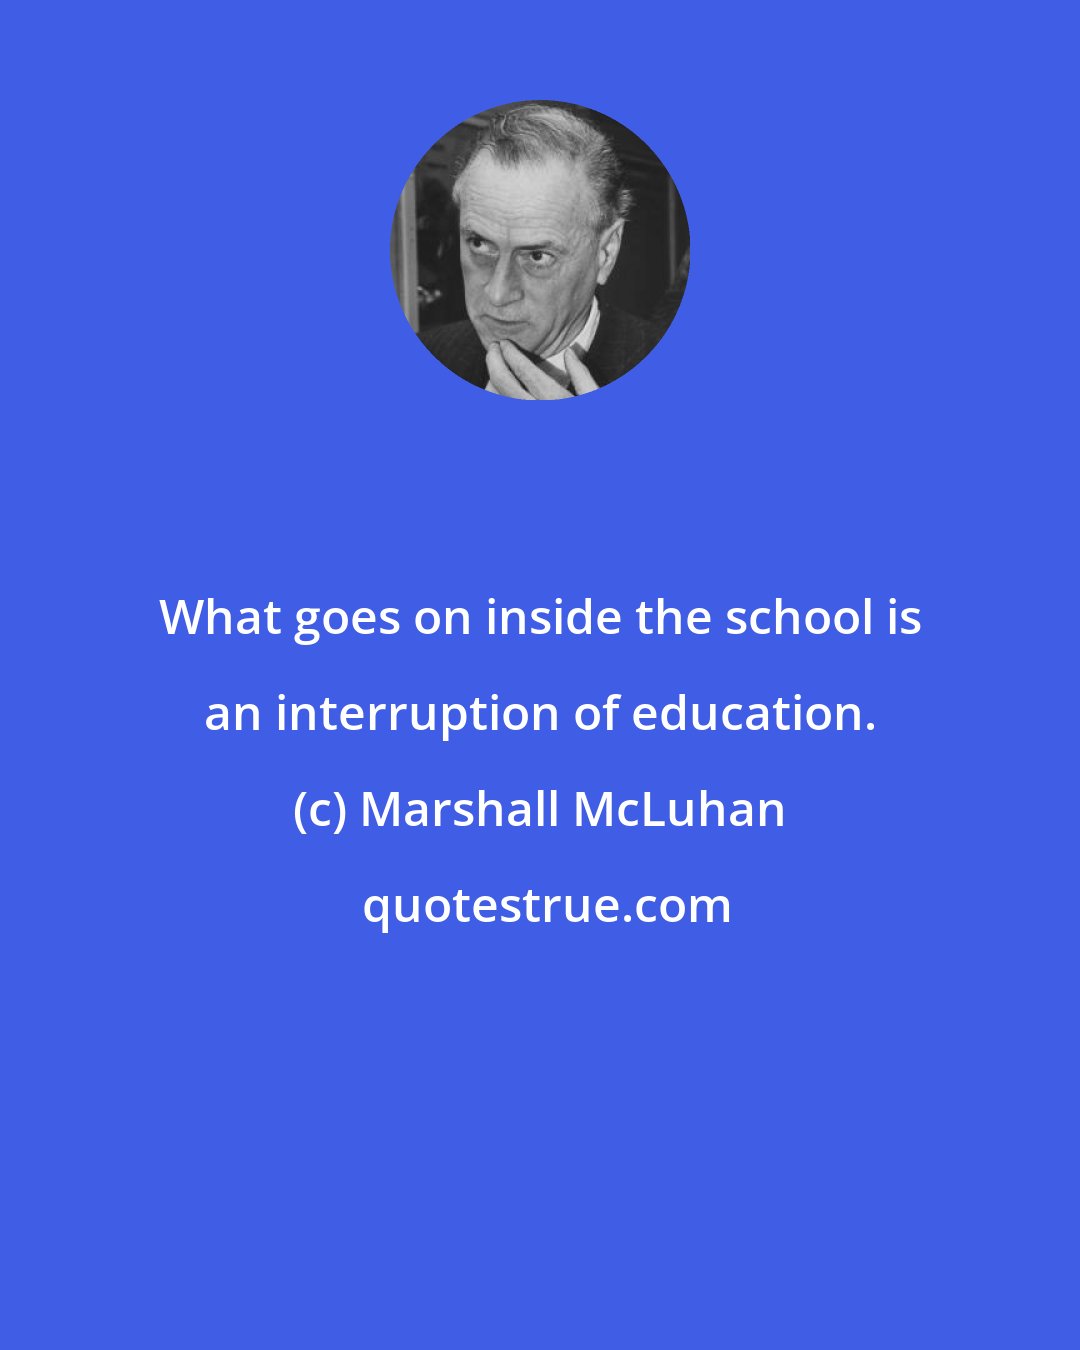 Marshall McLuhan: What goes on inside the school is an interruption of education.